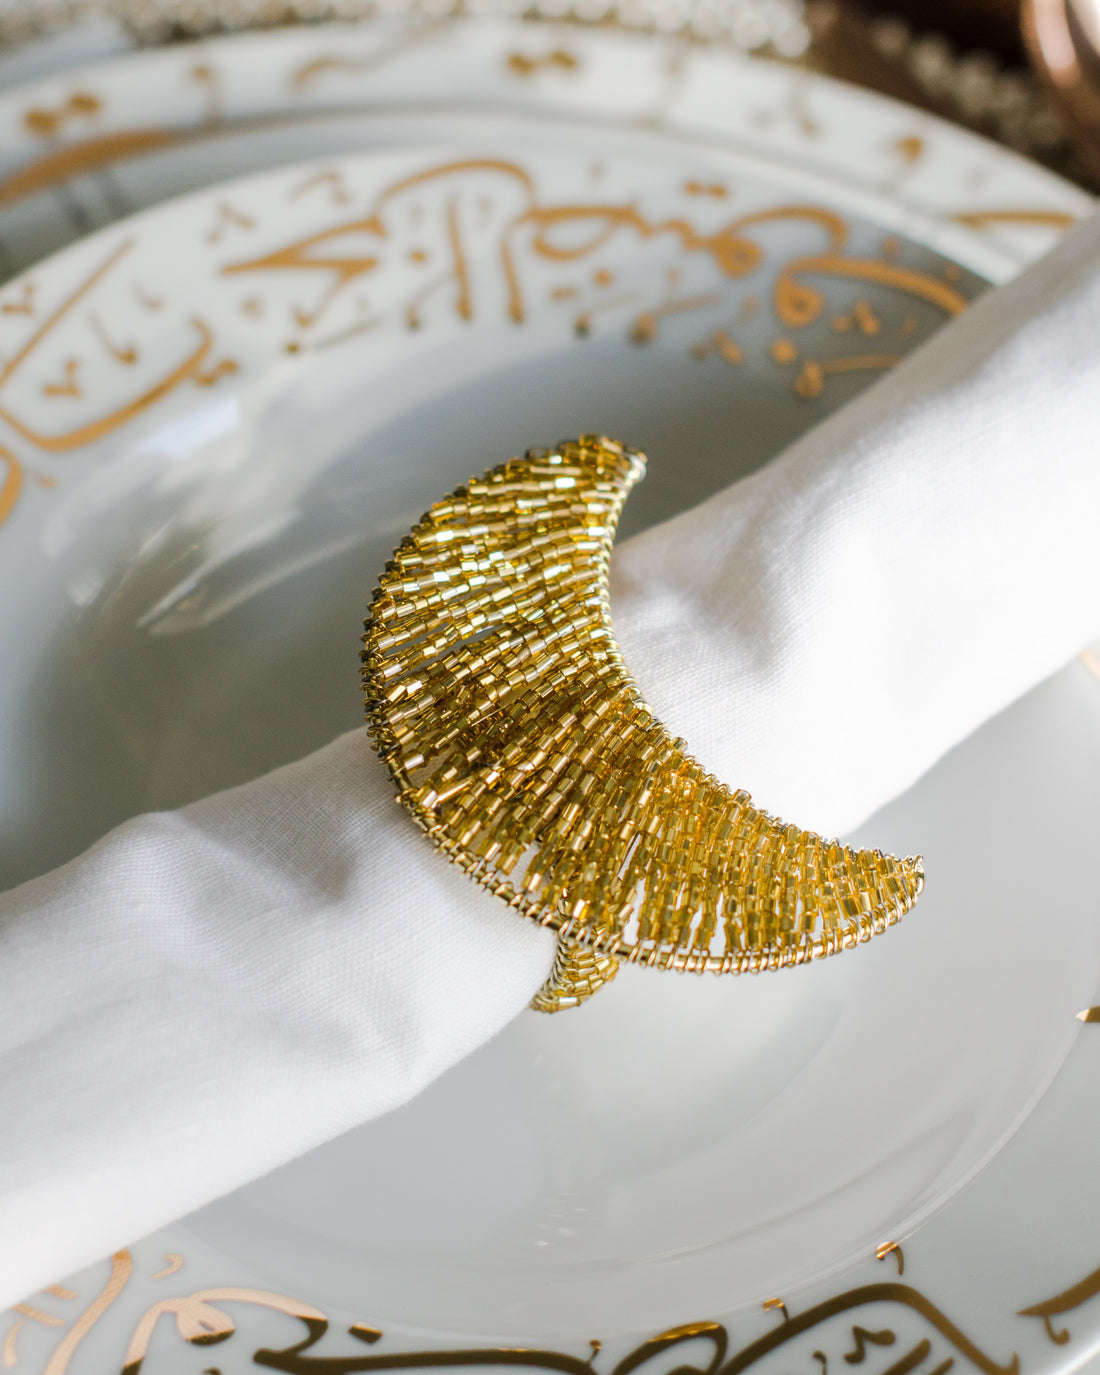 Golden napkin ring used to decor iftar table